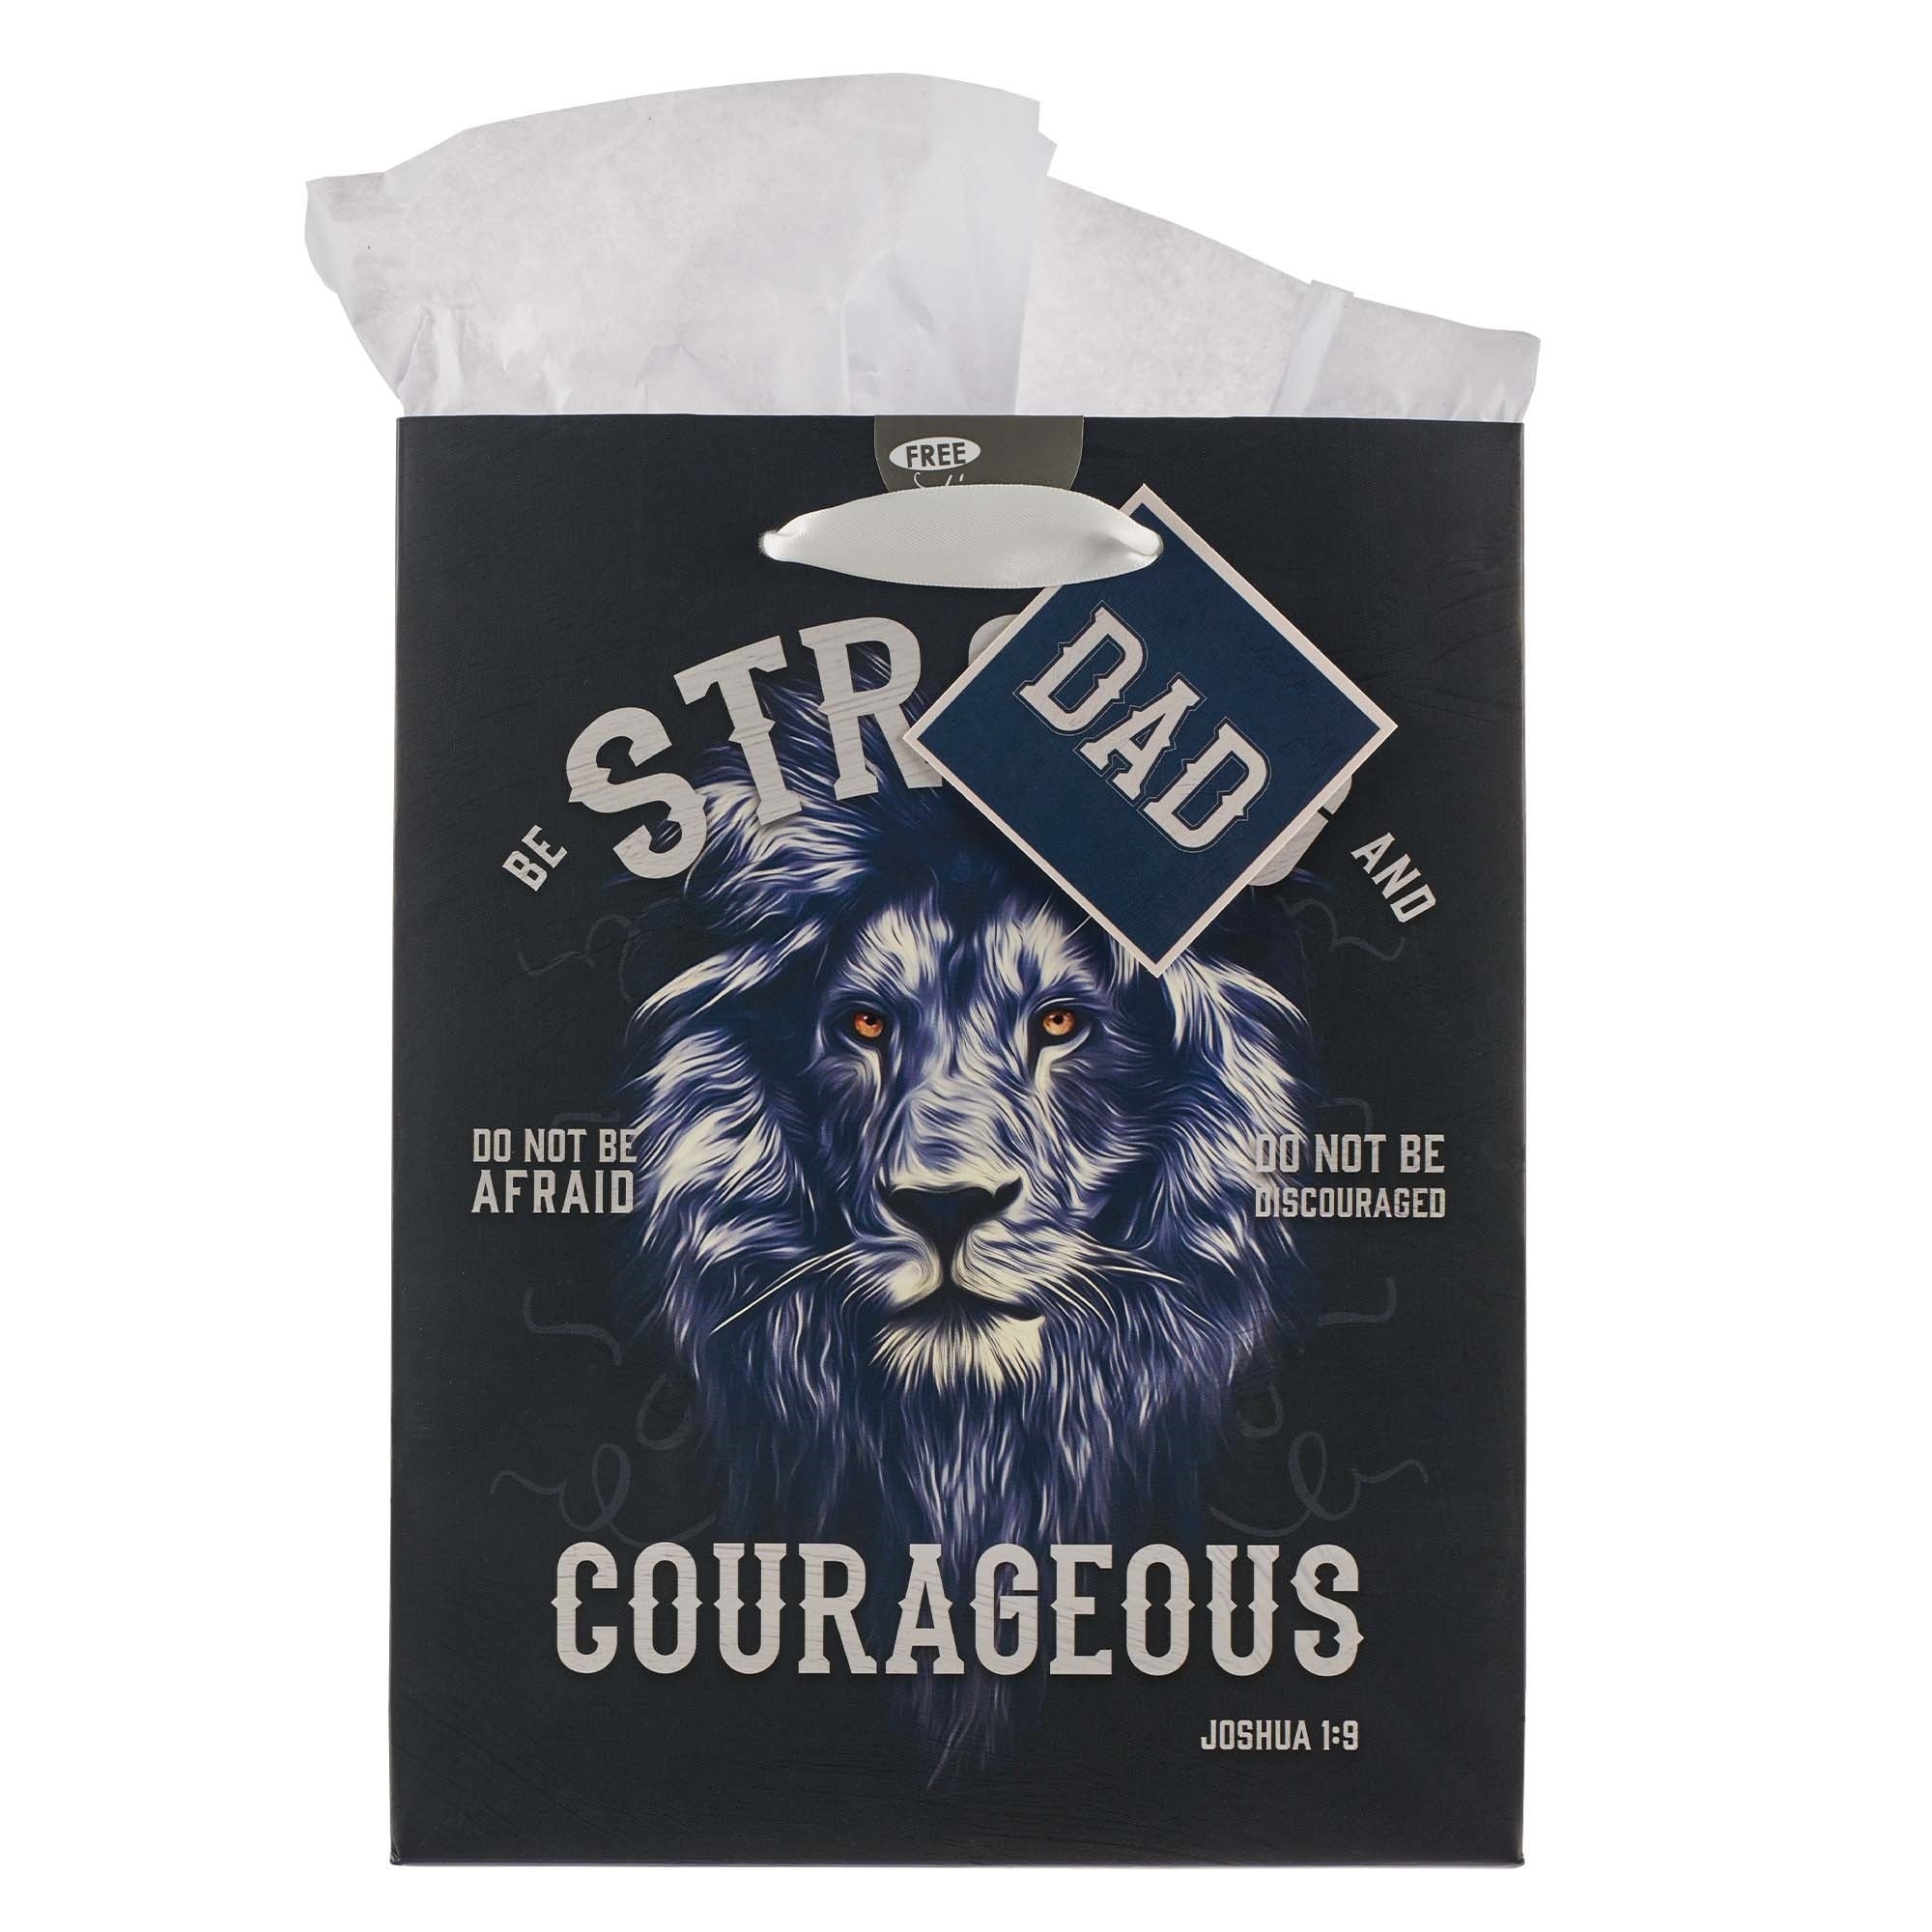 Gift Bag MD Black/White Strong & Courageous Dad Josh. 1:9